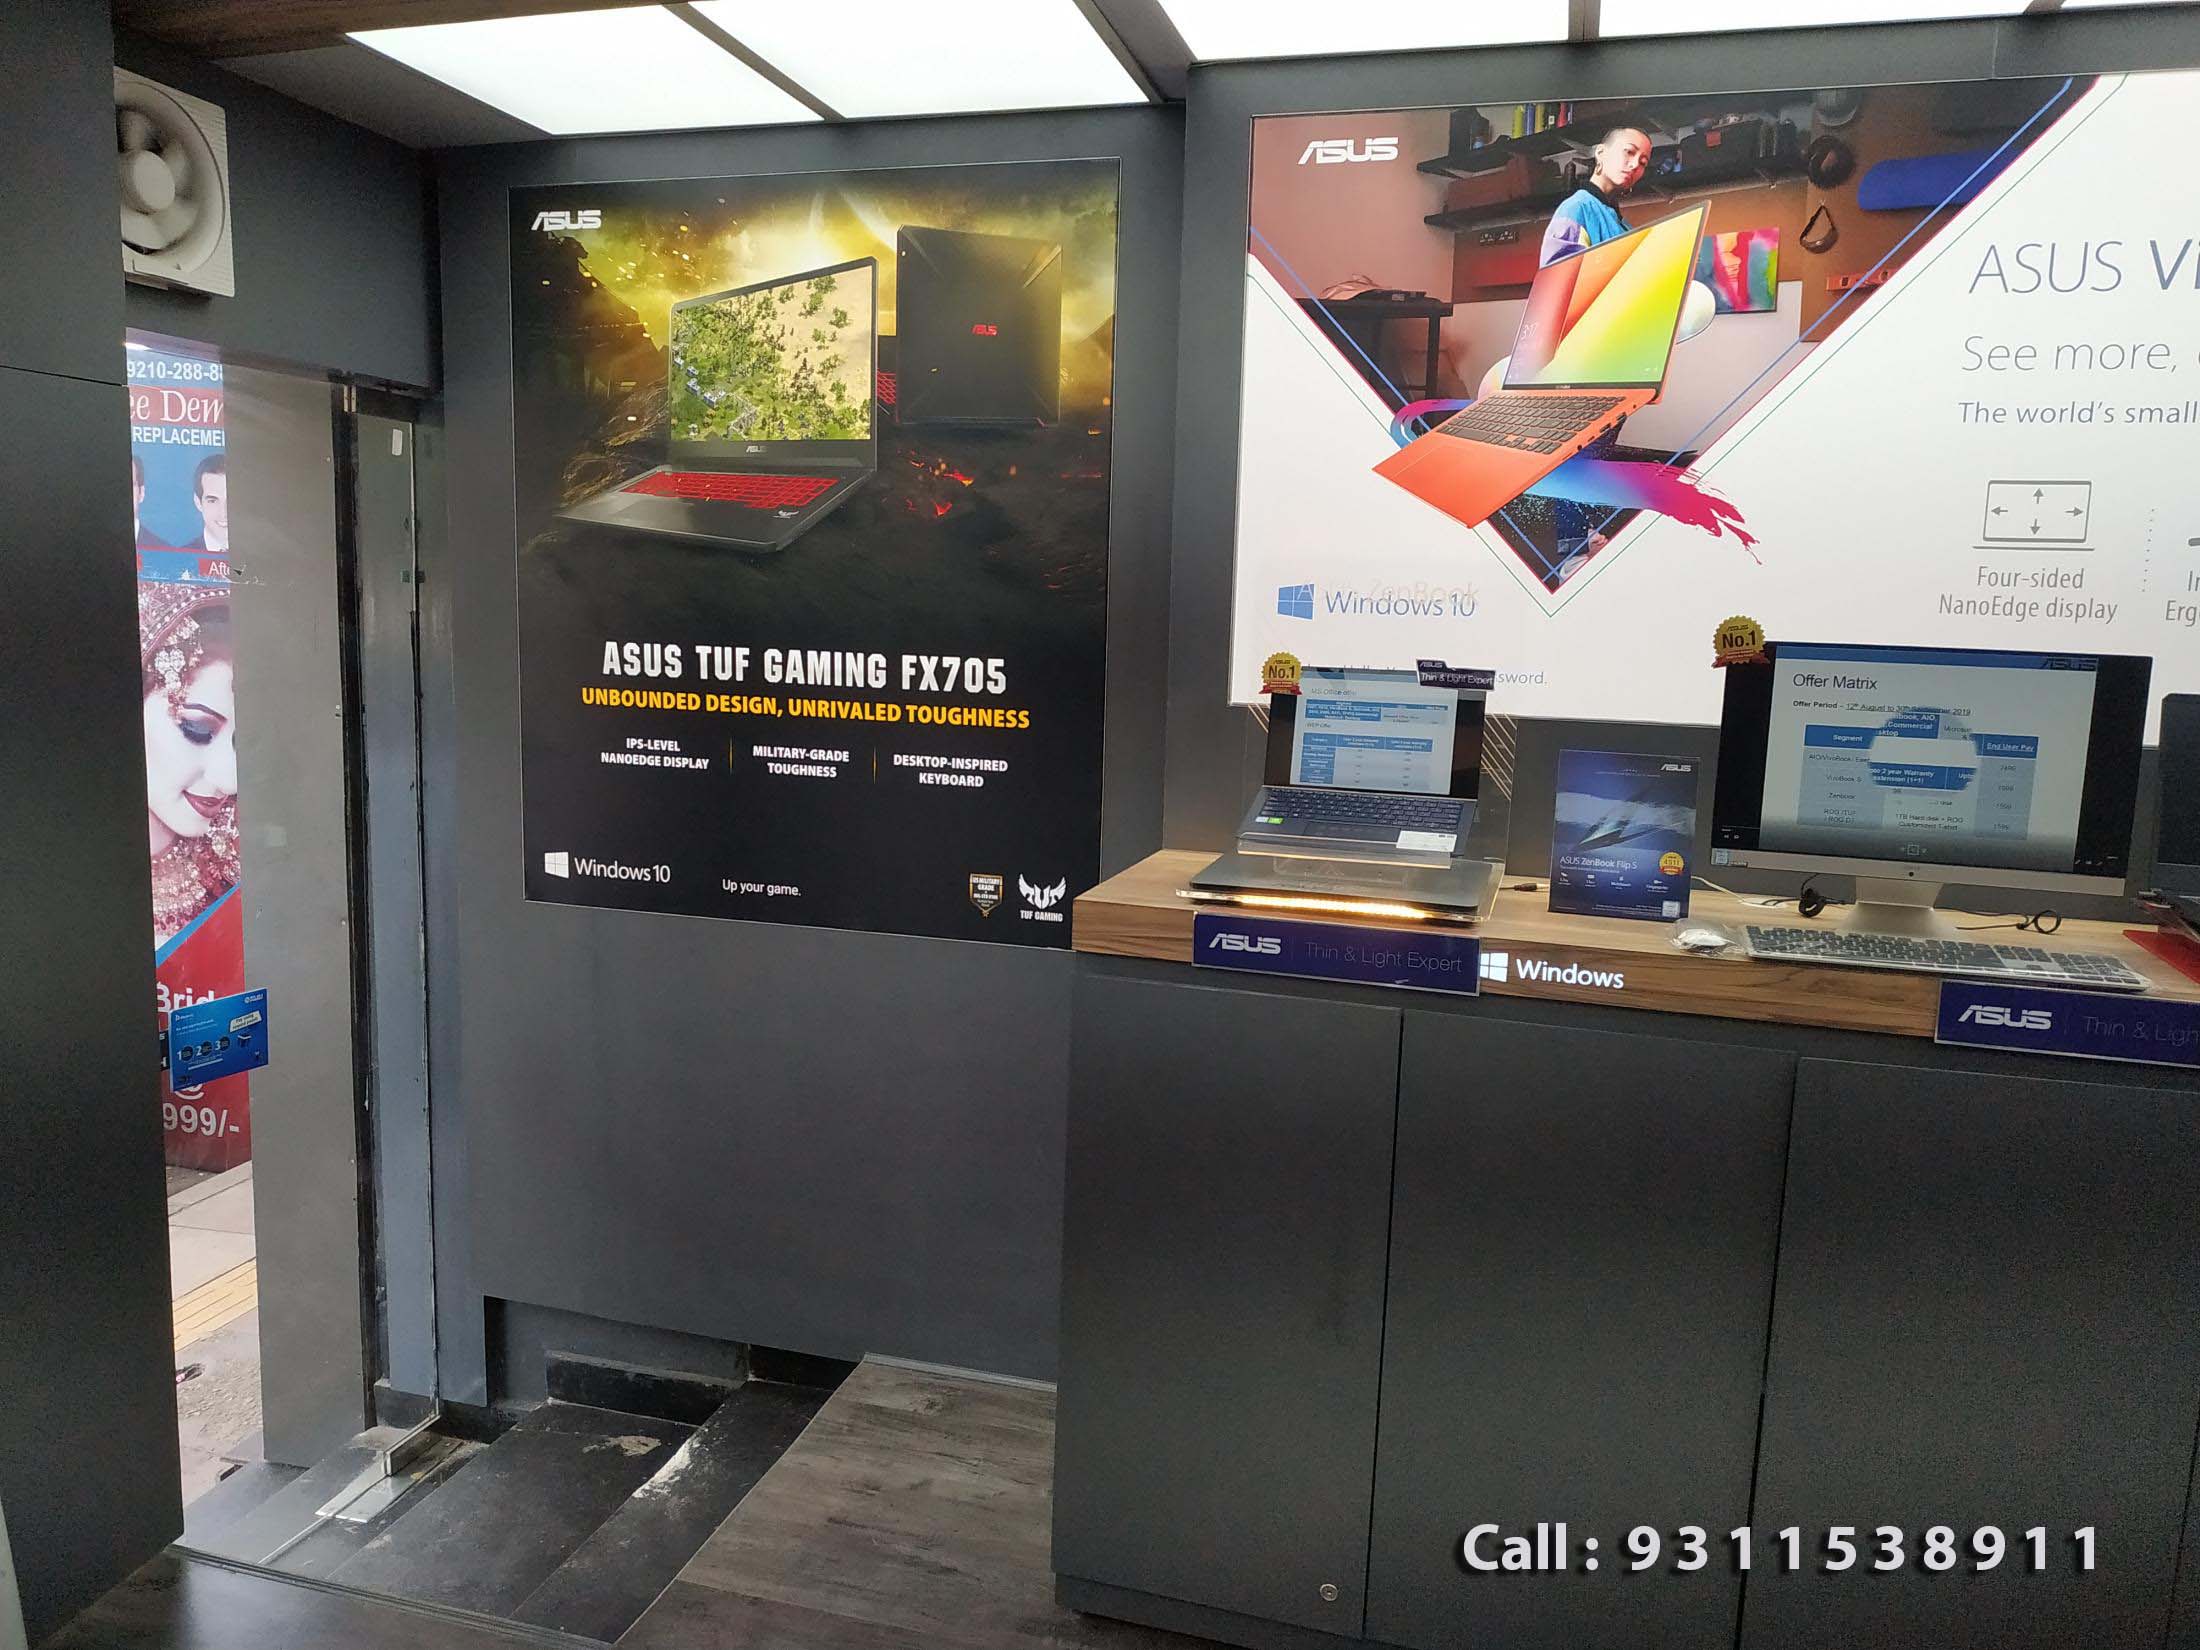 ASUS SERVICE CENTER IN PUNE